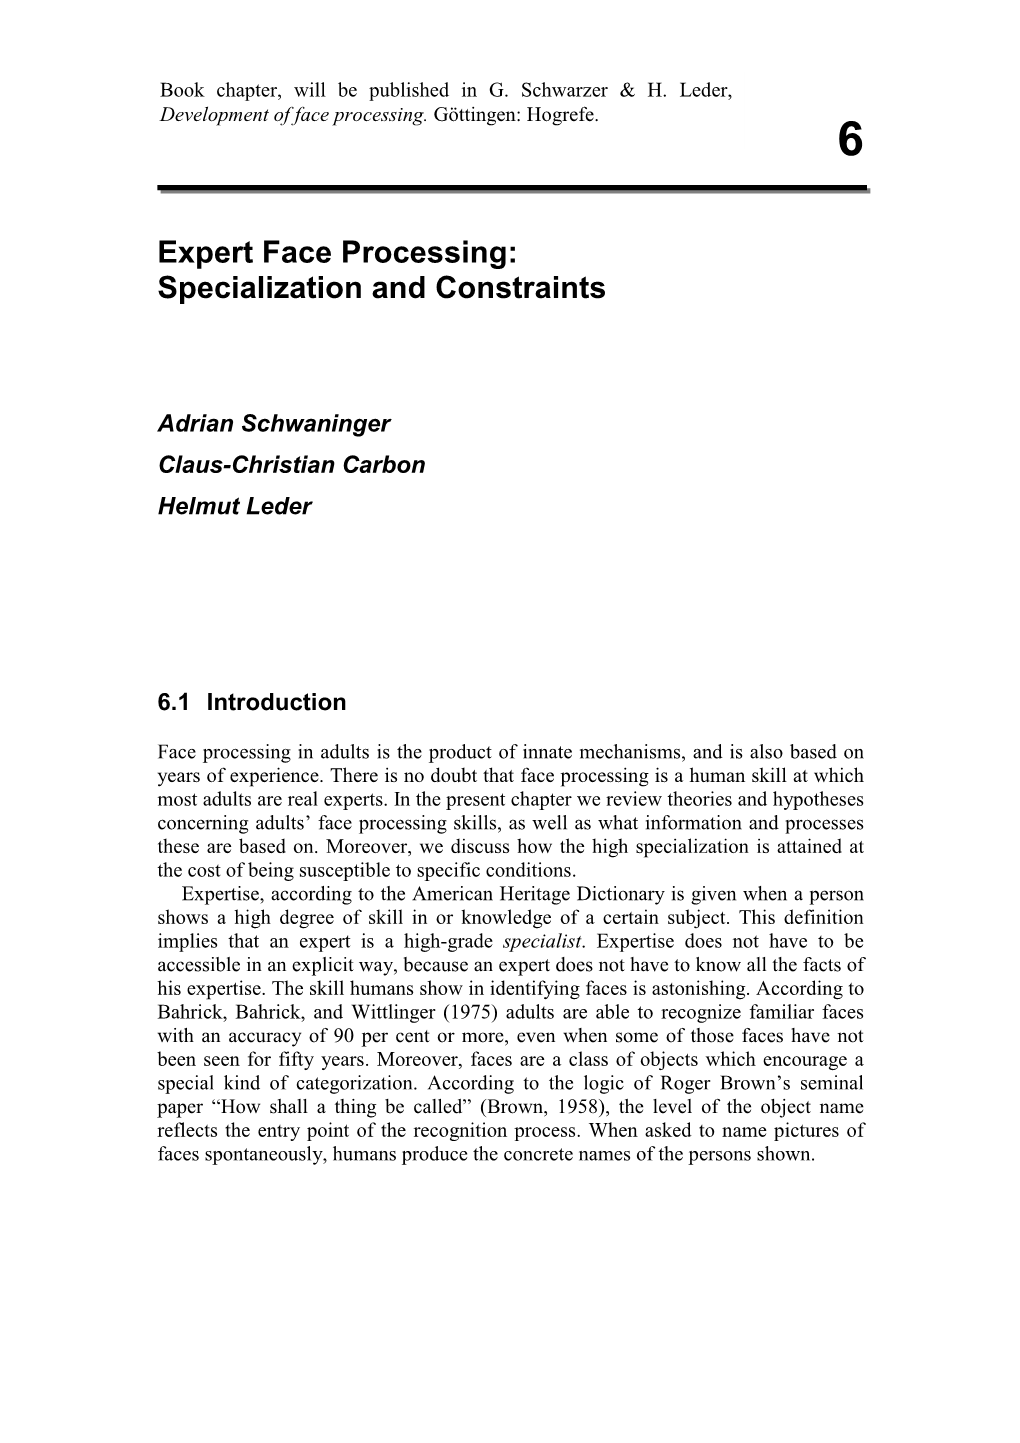 Expert Face Processing: Specialization and Constraints